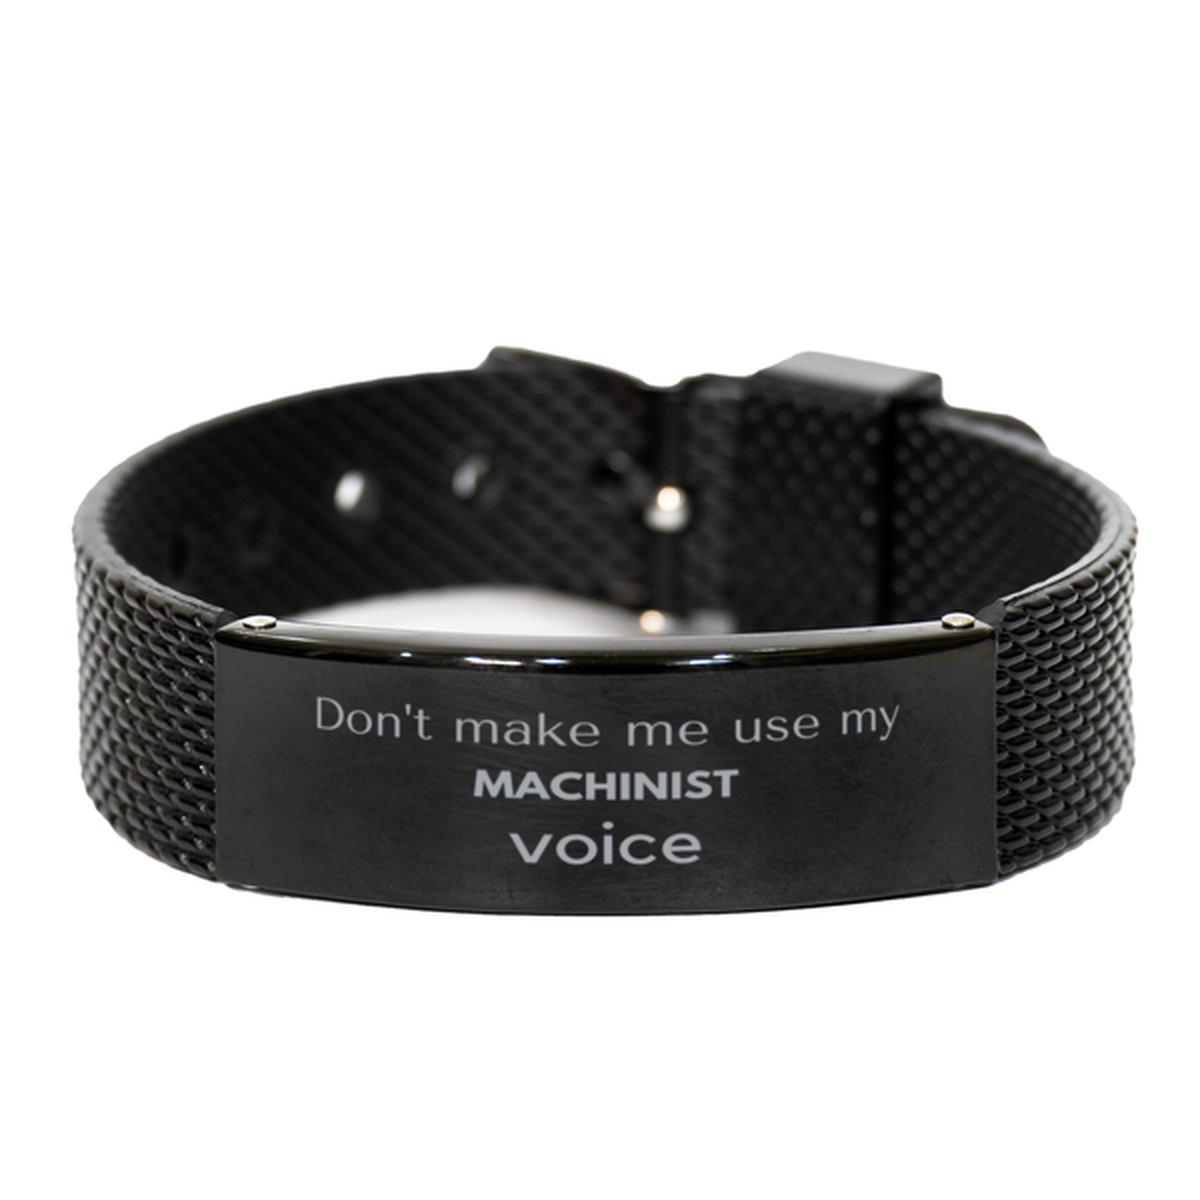 Don't make me use my Machinist voice, Sarcasm Machinist Gifts, Christmas Machinist Black Shark Mesh Bracelet Birthday Unique Gifts For Machinist Coworkers, Men, Women, Colleague, Friends